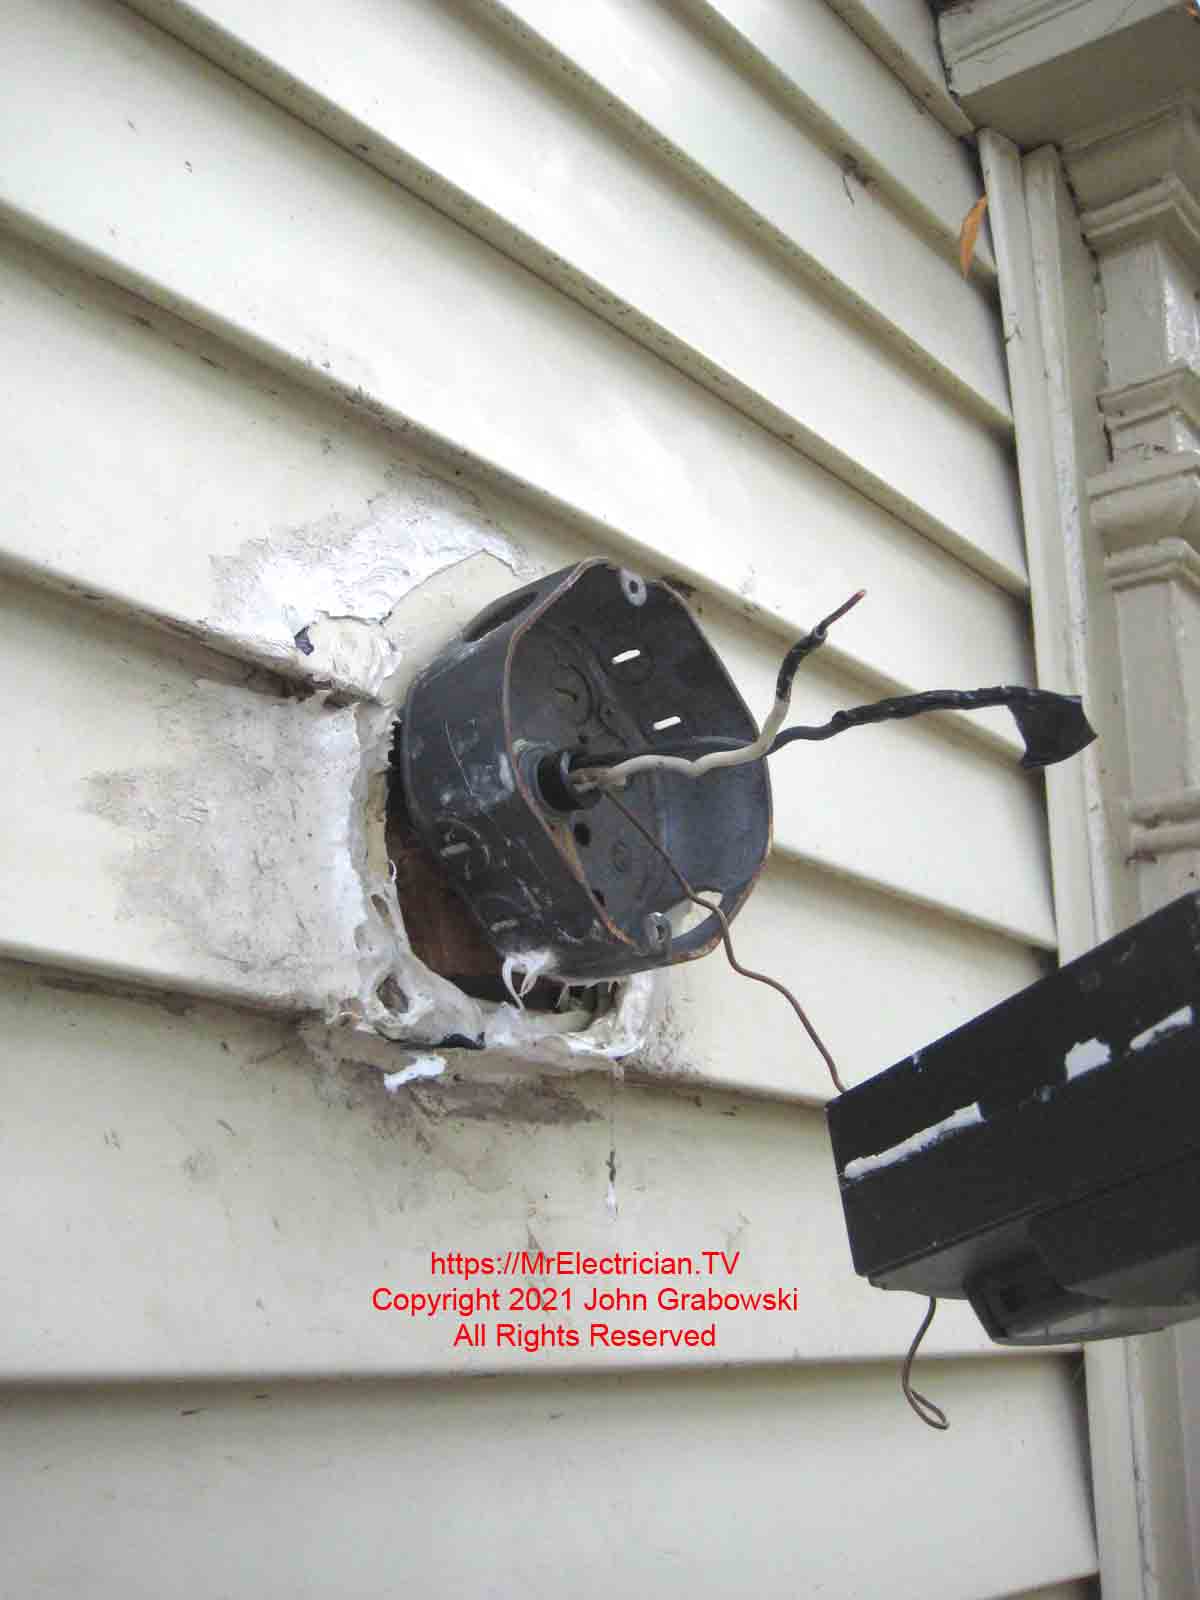 The old fixture, duct tape, and caulk is removed to reveal an indoor electrical box with some of the knockouts removed